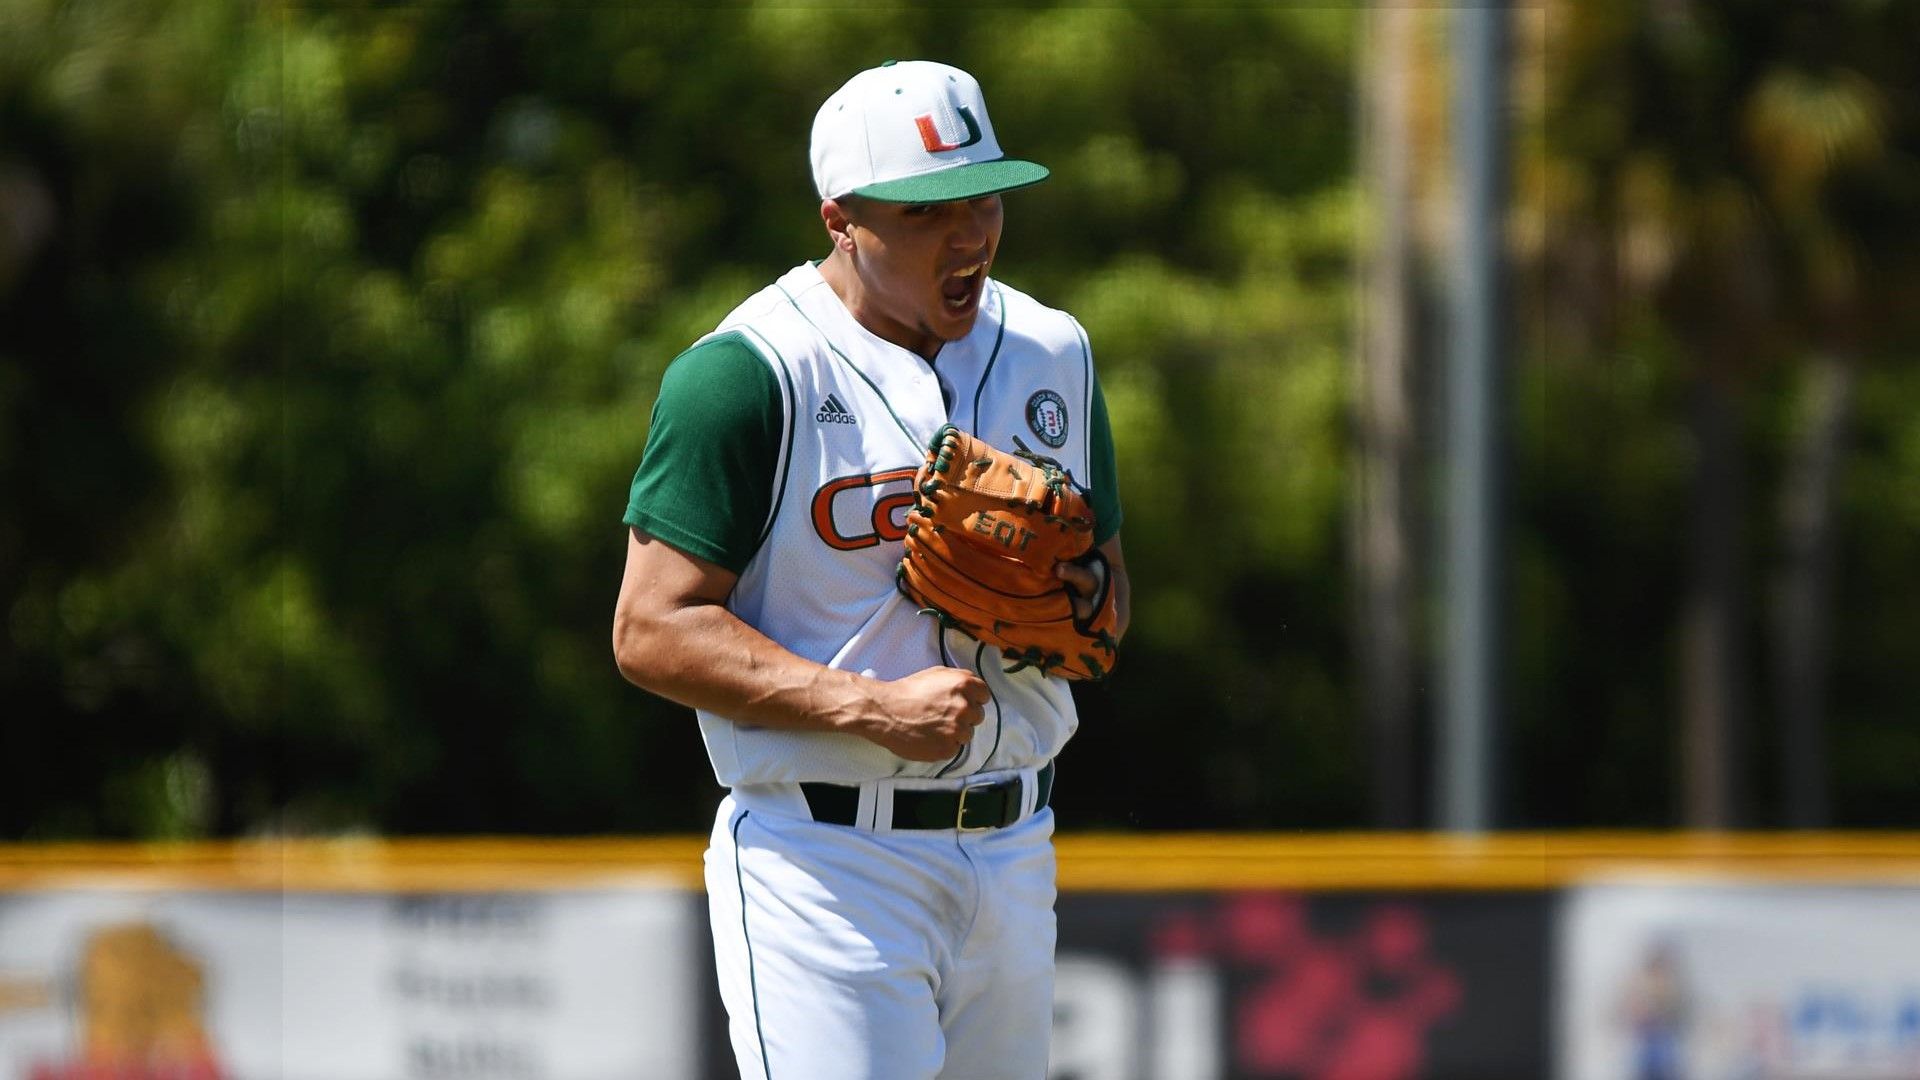 Canes Finish Off Sweep Of No. 24 Virginia, 8-1